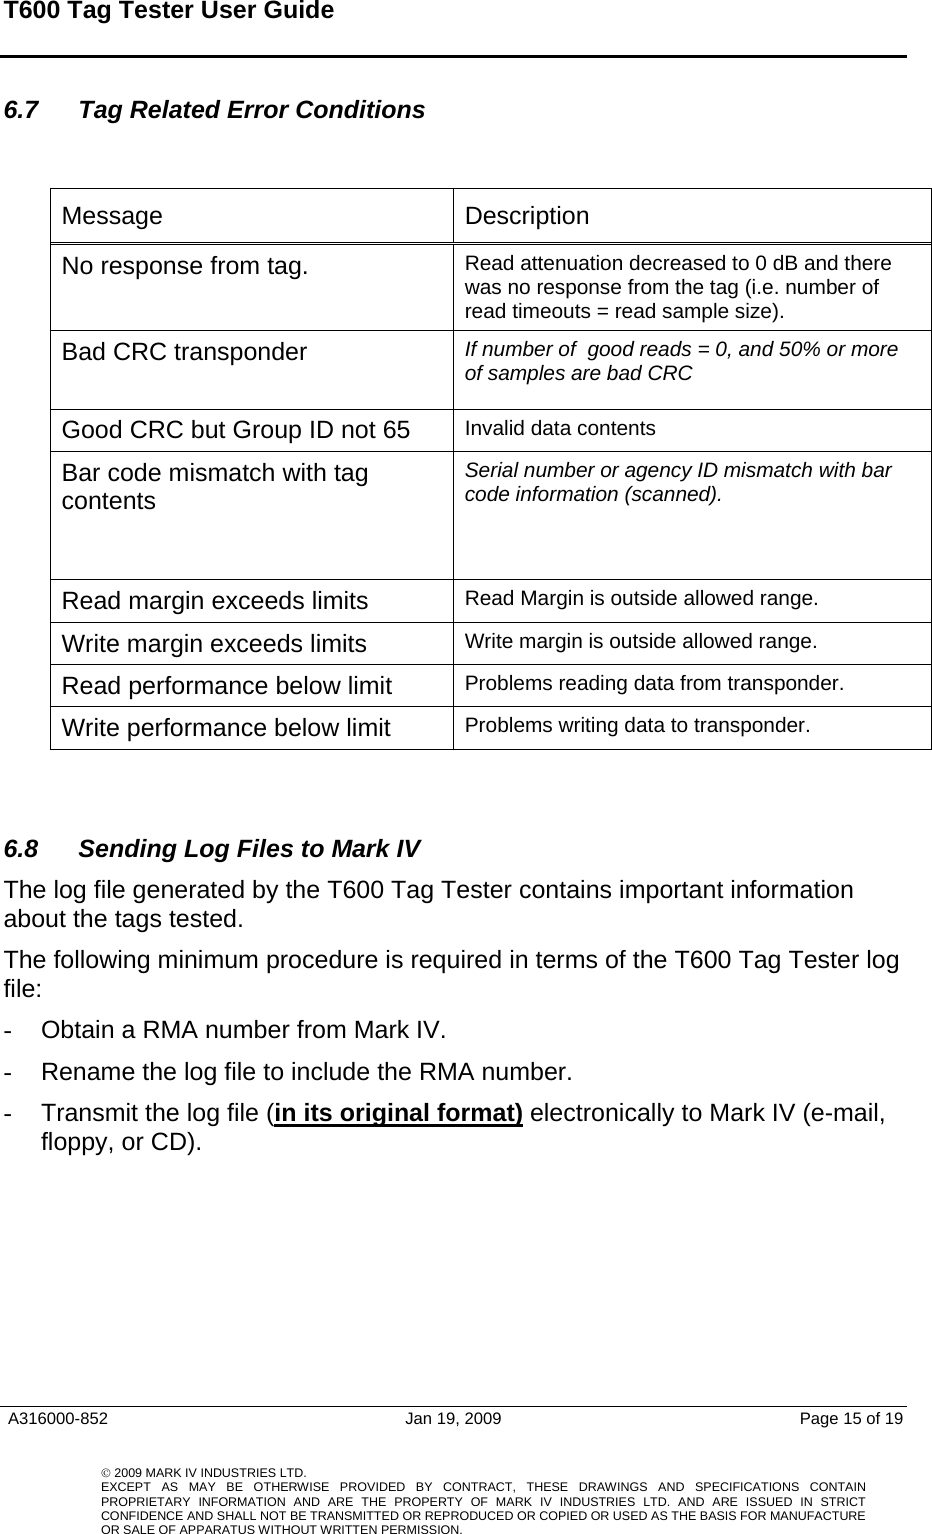 T600 Tag Tester User Guide     A316000-852  Jan 19, 2009  Page 15 of 19    © 2009 MARK IV INDUSTRIES LTD. EXCEPT AS MAY BE OTHERWISE PROVIDED BY CONTRACT, THESE DRAWINGS AND SPECIFICATIONS CONTAINPROPRIETARY INFORMATION AND ARE THE PROPERTY OF MARK IV INDUSTRIES LTD. AND ARE ISSUED IN STRICT CONFIDENCE AND SHALL NOT BE TRANSMITTED OR REPRODUCED OR COPIED OR USED AS THE BASIS FOR MANUFACTUREOR SALE OF APPARATUS WITHOUT WRITTEN PERMISSION.6.7  Tag Related Error Conditions   Message   Description No response from tag.   Read attenuation decreased to 0 dB and there was no response from the tag (i.e. number of  read timeouts = read sample size). Bad CRC transponder  If number of  good reads = 0, and 50% or more of samples are bad CRC Good CRC but Group ID not 65  Invalid data contents Bar code mismatch with tag contents    Serial number or agency ID mismatch with bar code information (scanned).  Read margin exceeds limits  Read Margin is outside allowed range.  Write margin exceeds limits   Write margin is outside allowed range.  Read performance below limit  Problems reading data from transponder.  Write performance below limit   Problems writing data to transponder.   6.8  Sending Log Files to Mark IV The log file generated by the T600 Tag Tester contains important information about the tags tested.   The following minimum procedure is required in terms of the T600 Tag Tester log file:  -  Obtain a RMA number from Mark IV. -  Rename the log file to include the RMA number.  -  Transmit the log file (in its original format) electronically to Mark IV (e-mail, floppy, or CD).         